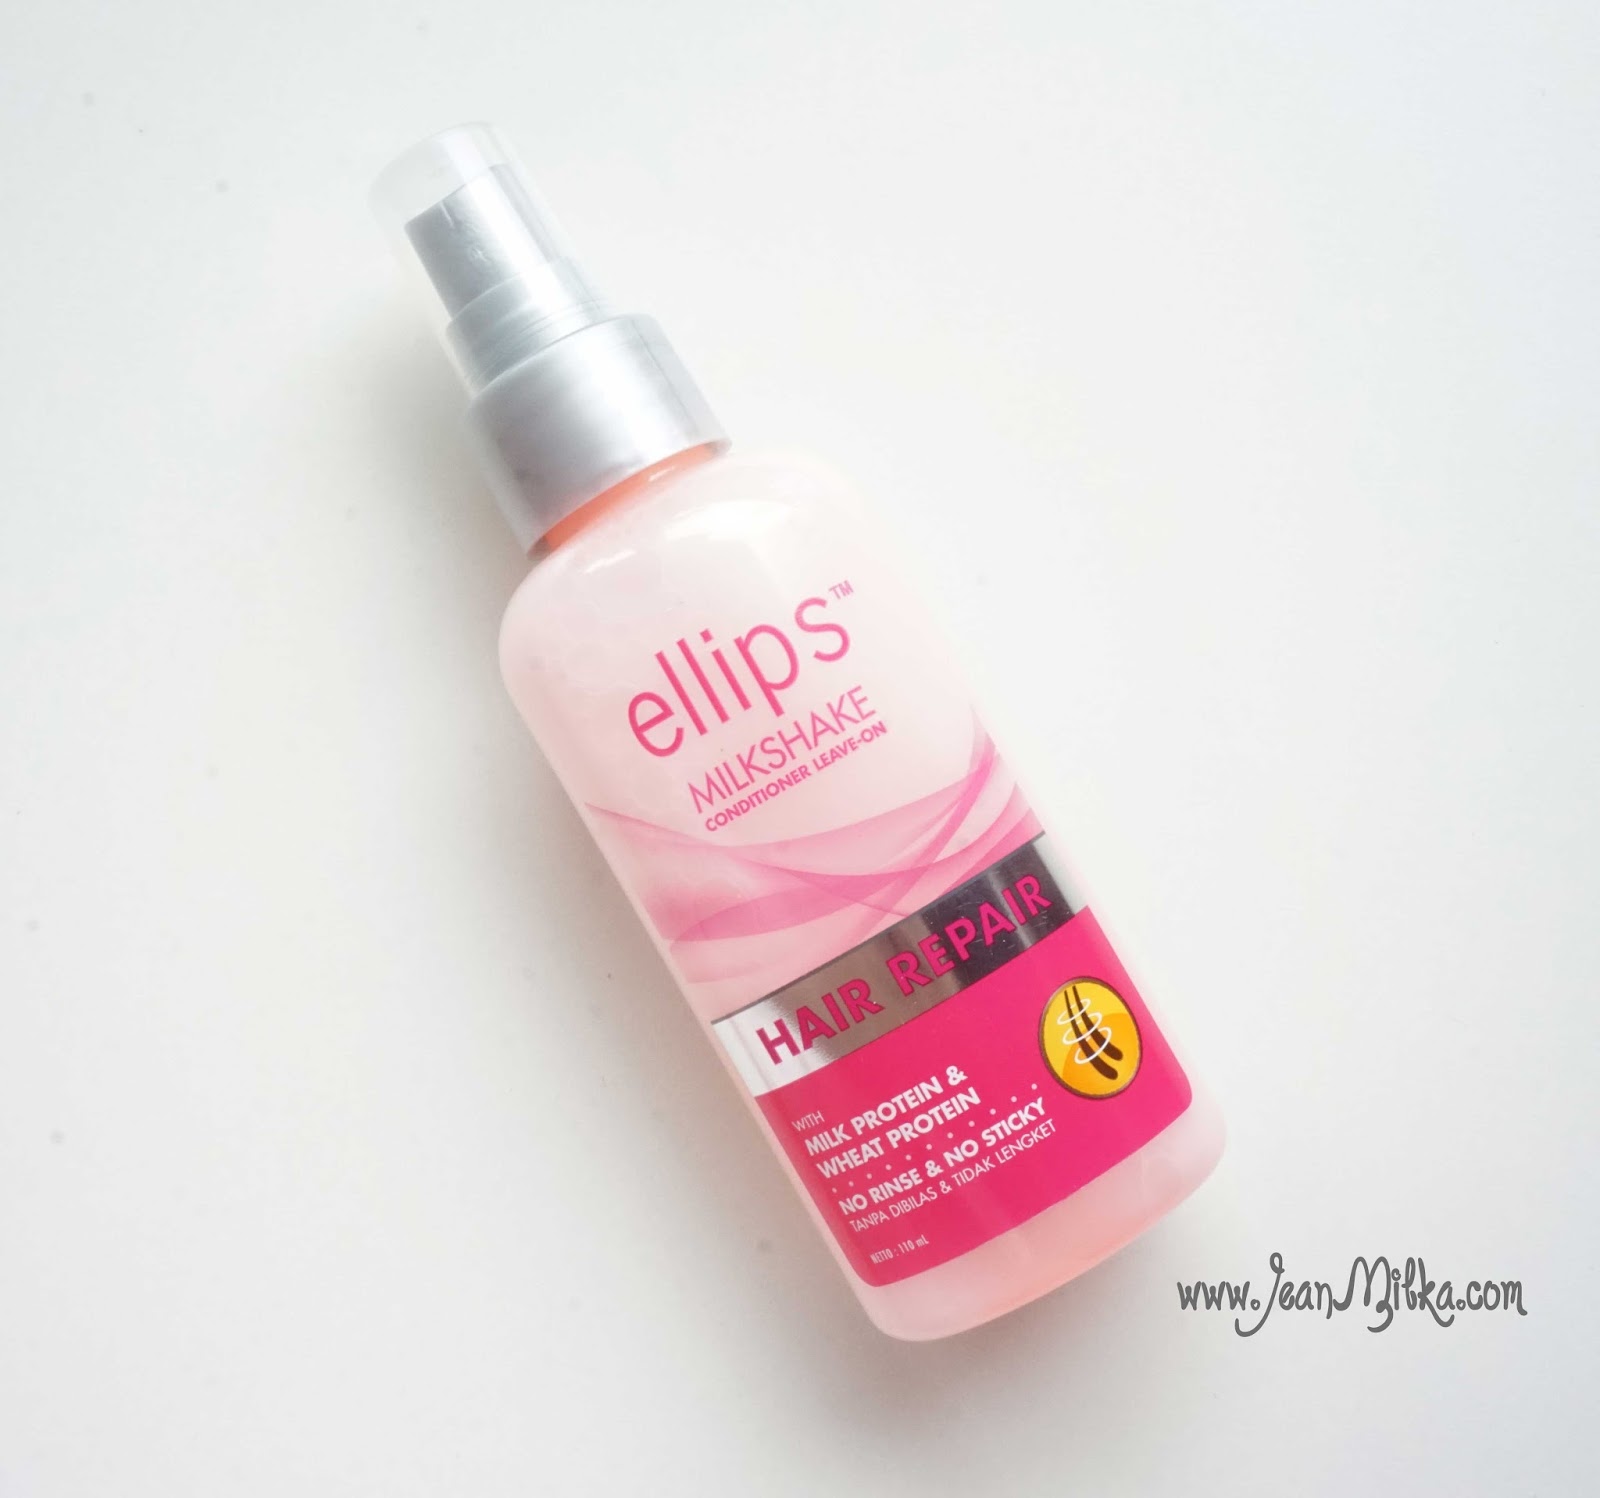 Sponsored My Everyday Hair Routine With Ellips Hair Treatment